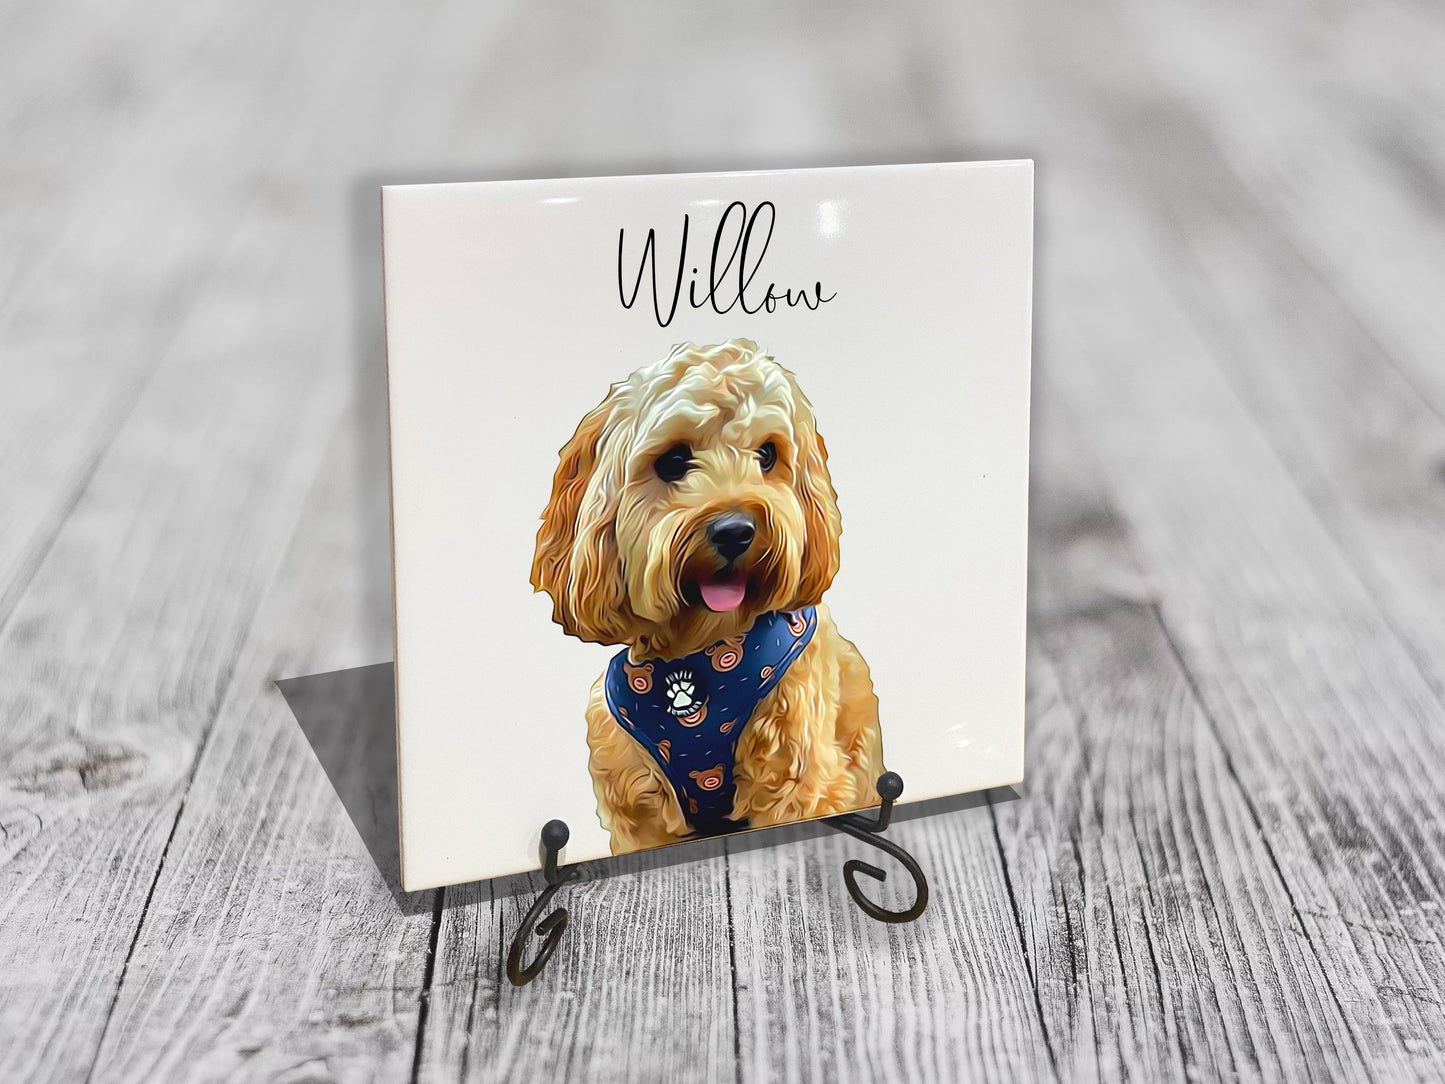 Personalised Pet Portrait on Tile with Stand - Brush Custom Photo Print Dog Cat